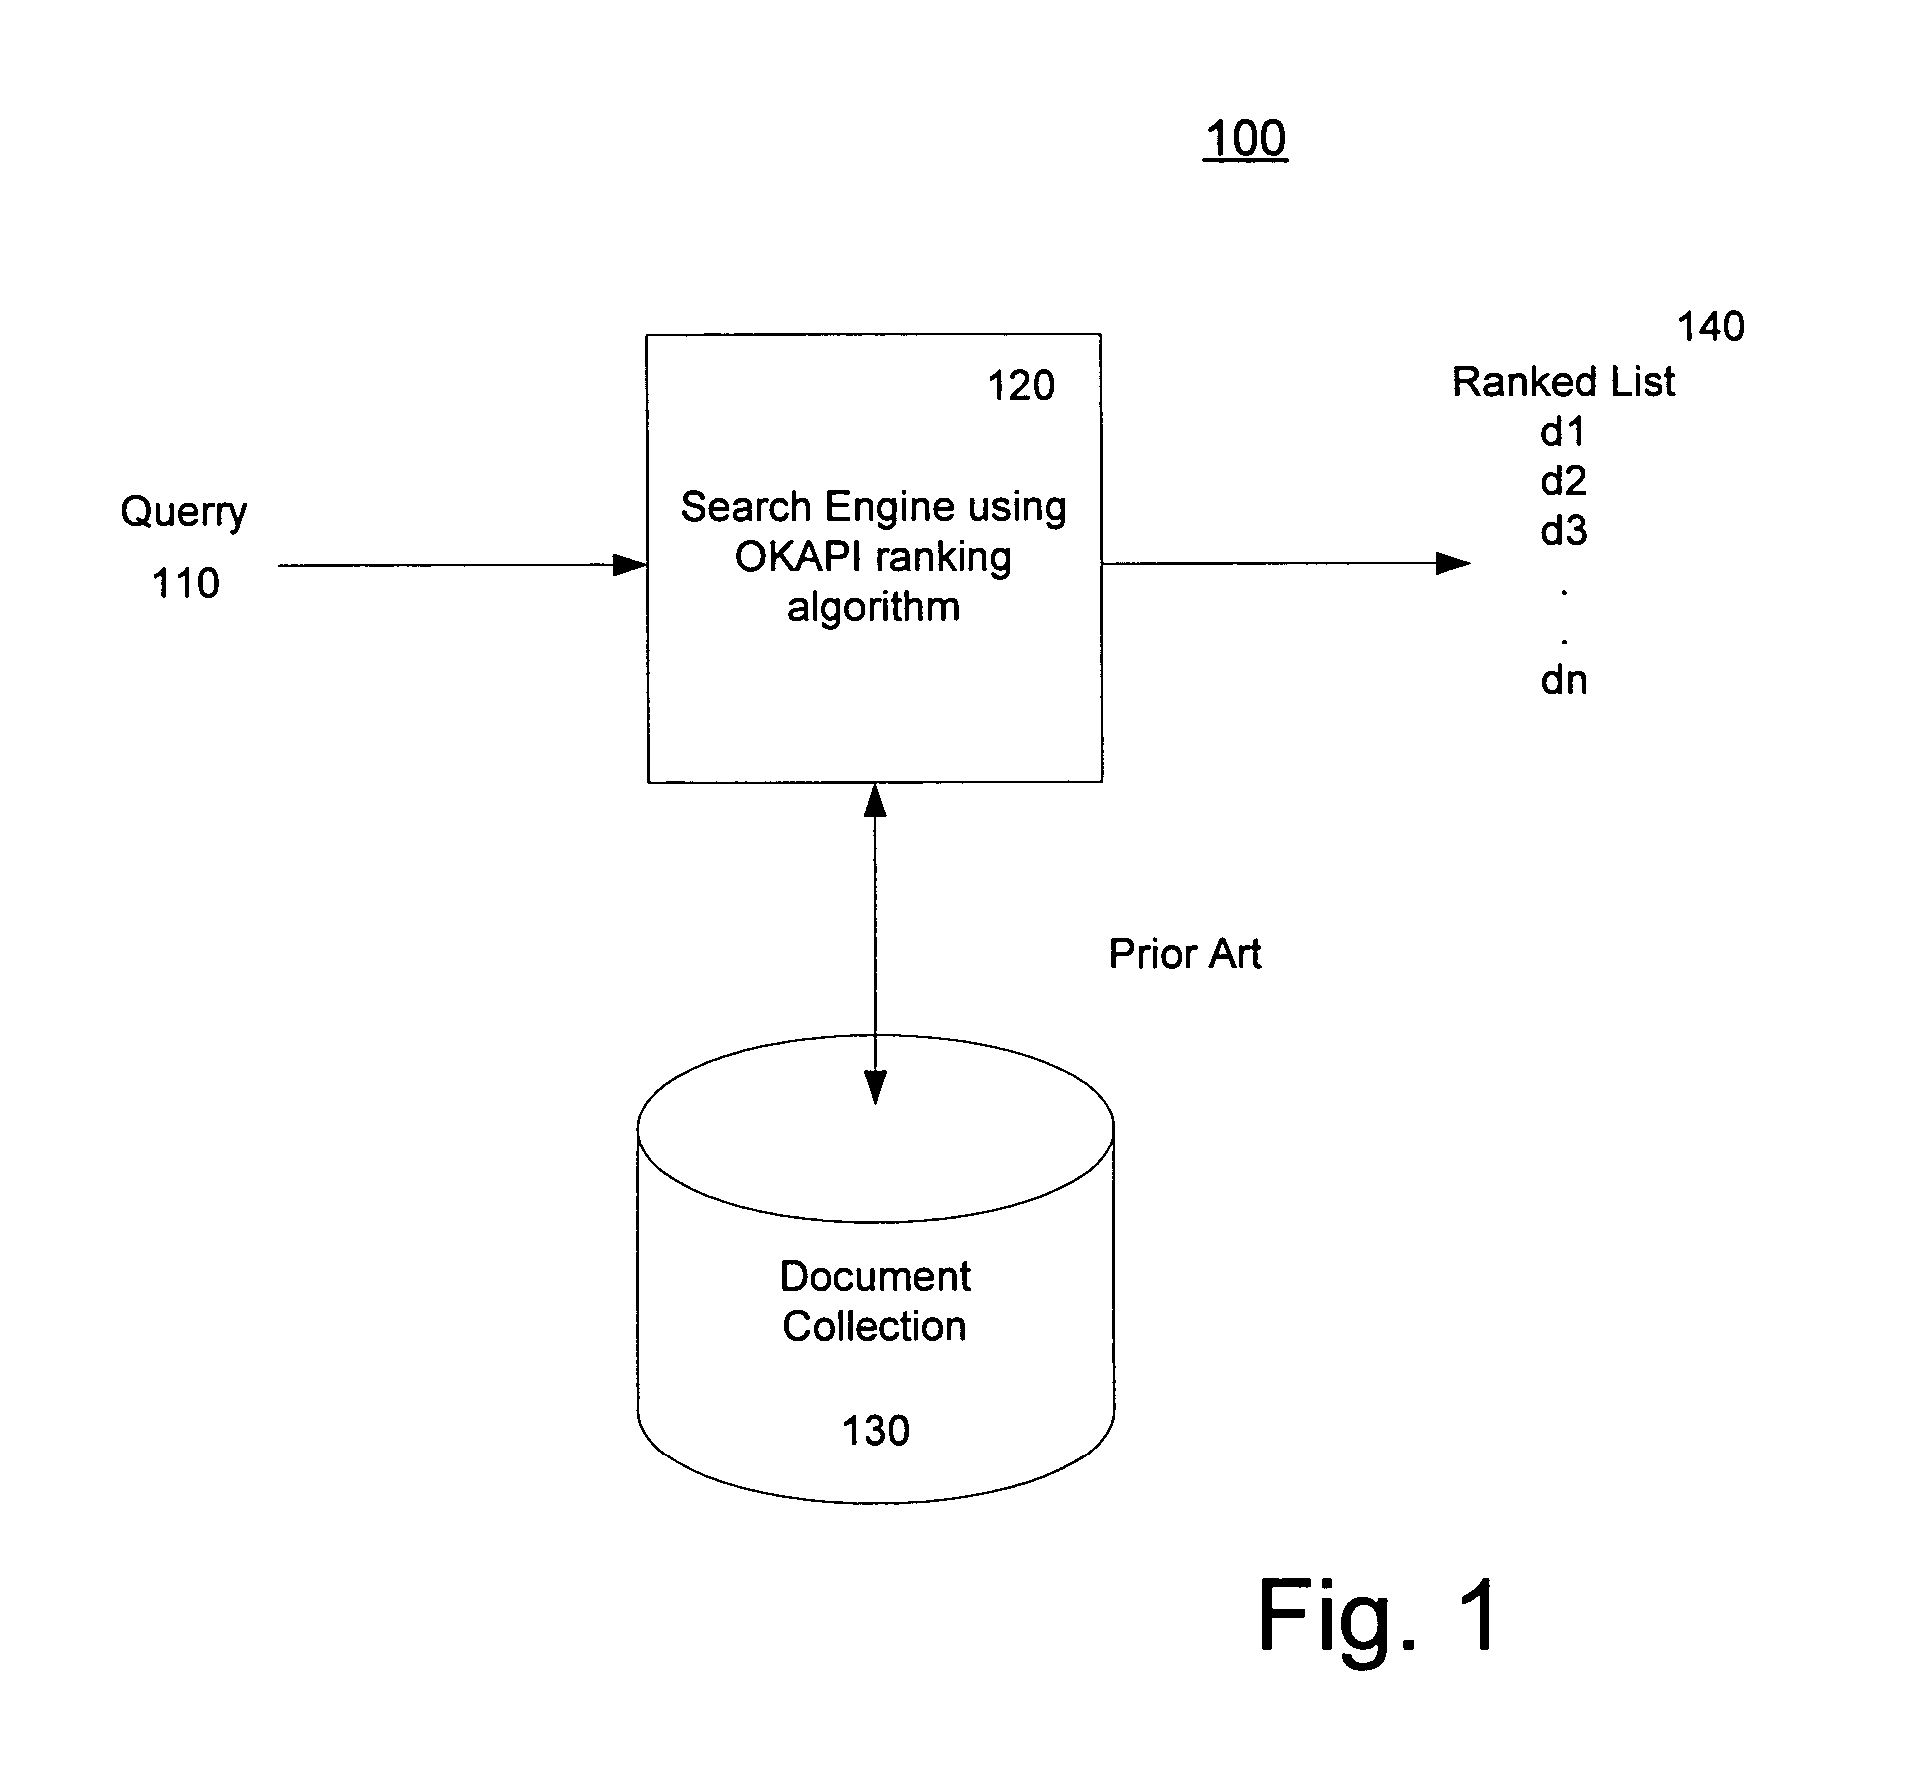 System and method for blending the results of a classifier and a search engine